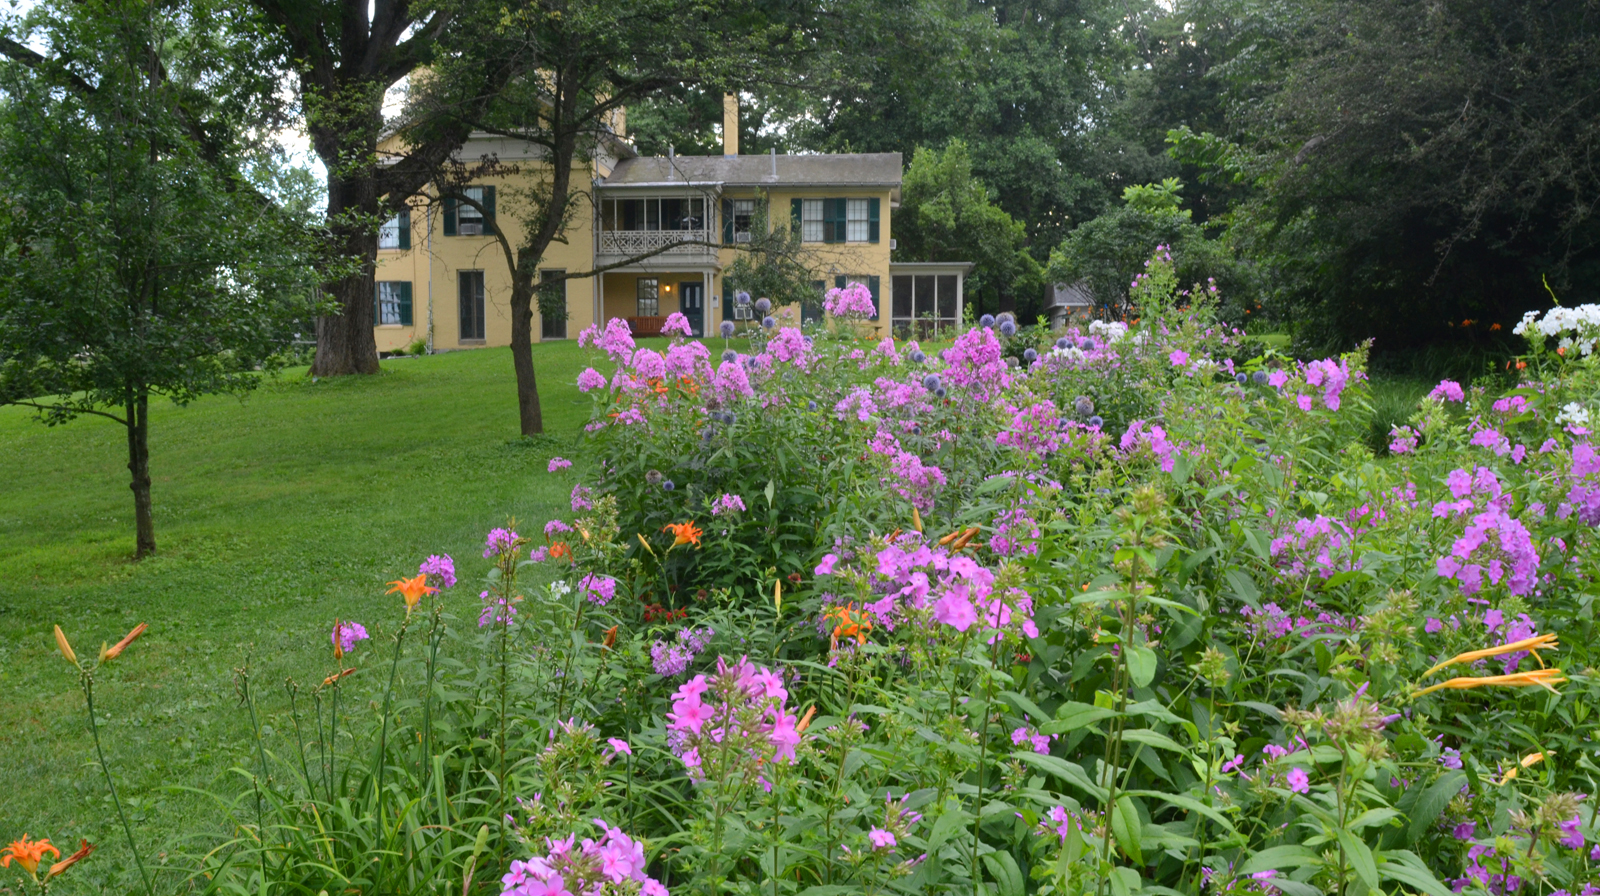 the homestead viewed through lush landscape with flowers in foreground